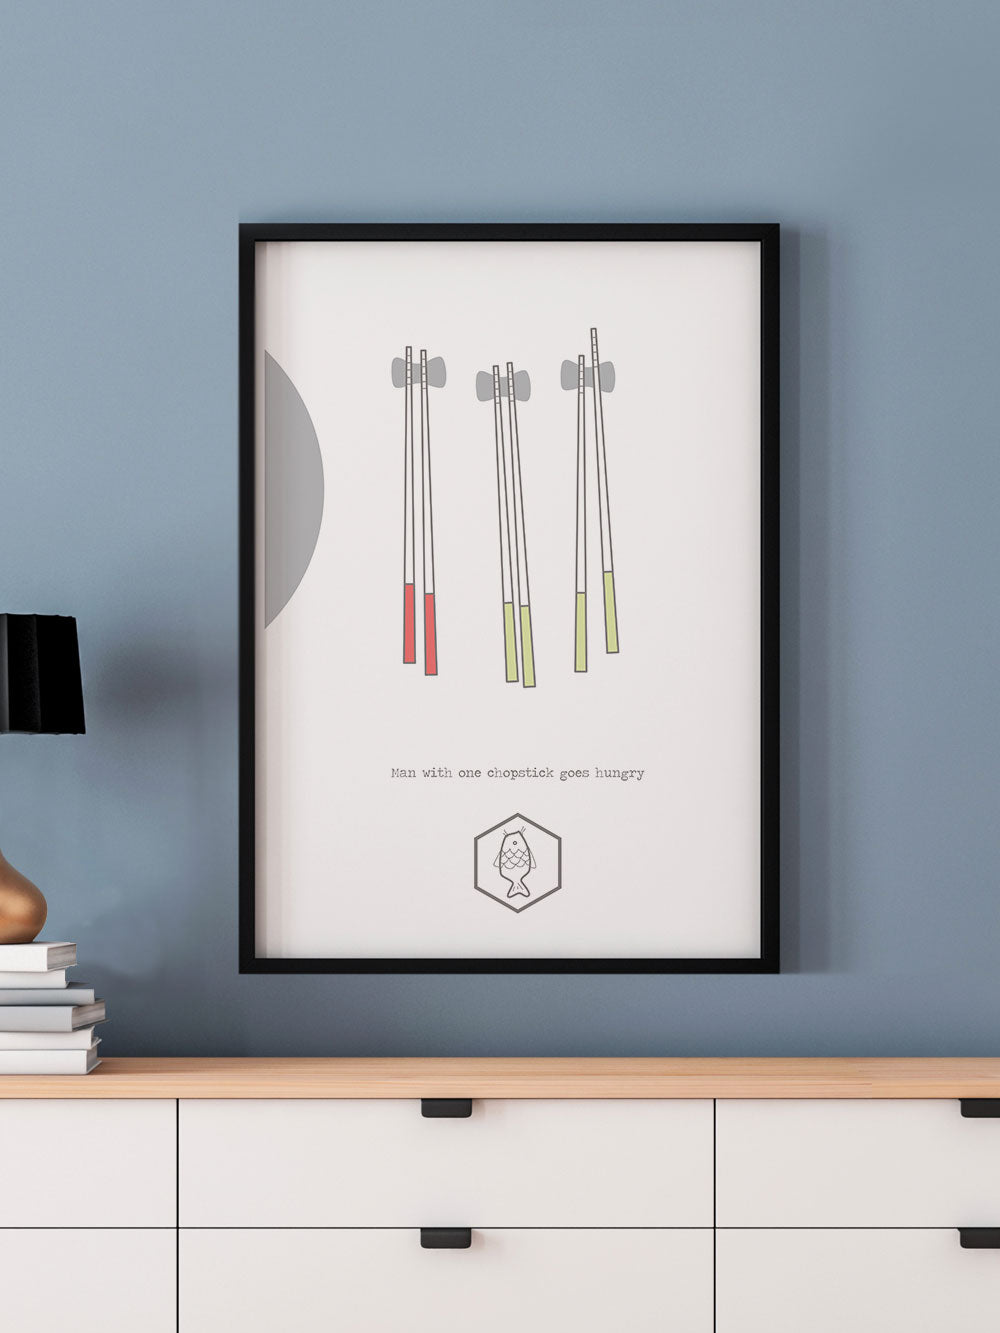 One Chopstick Sushi Art Print in a frame on a wall